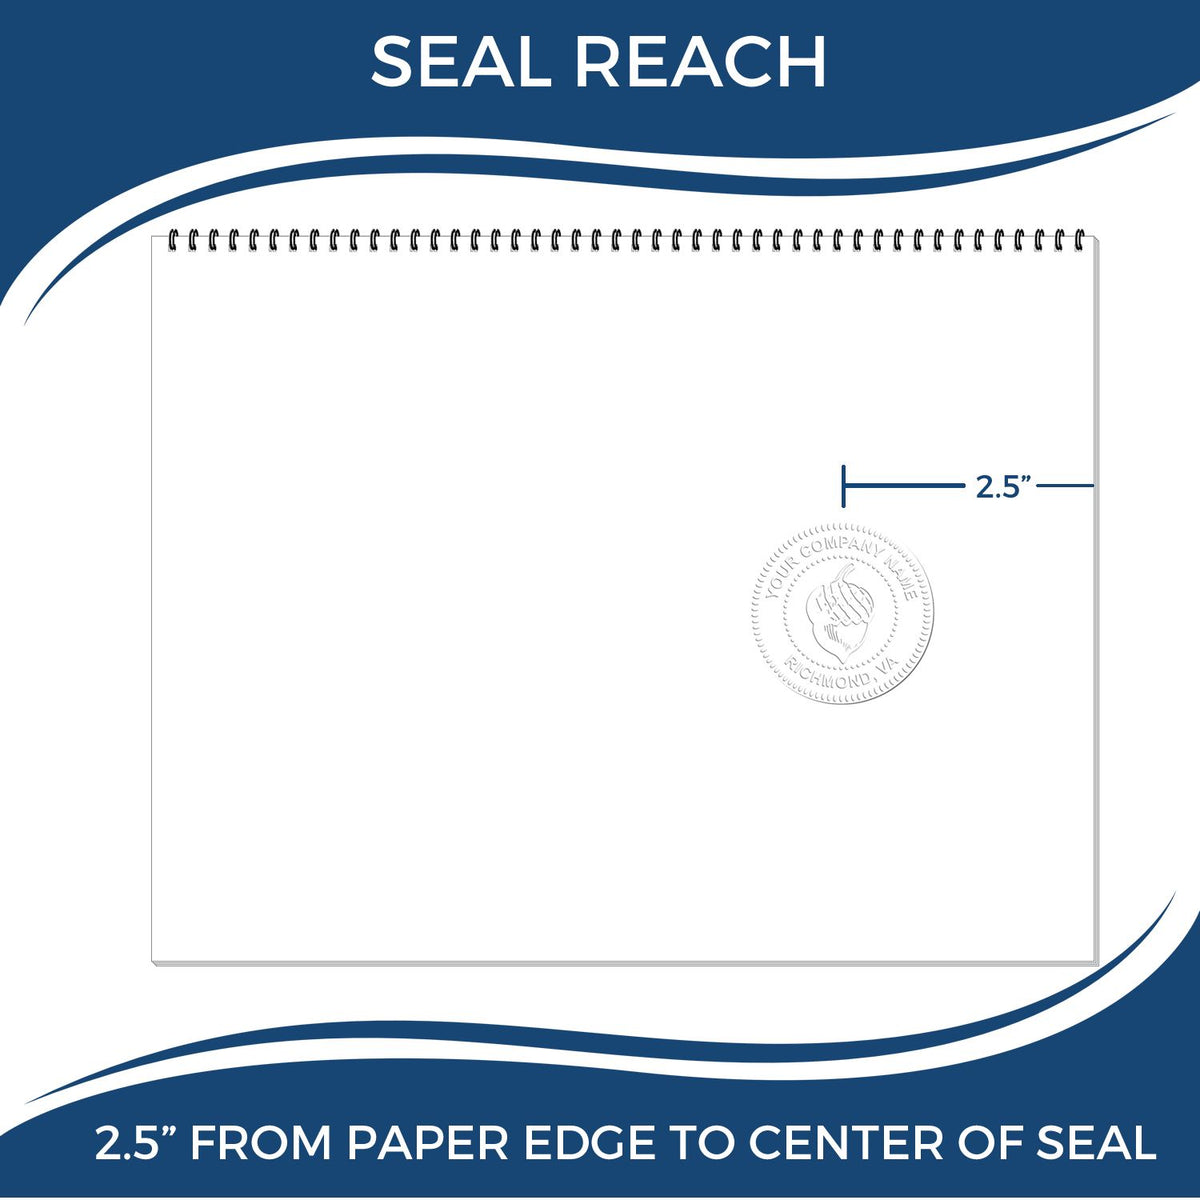 An infographic showing the seal reach which is represented by a ruler and a miniature seal image of the Heavy Duty Cast Iron New York Architect Embosser